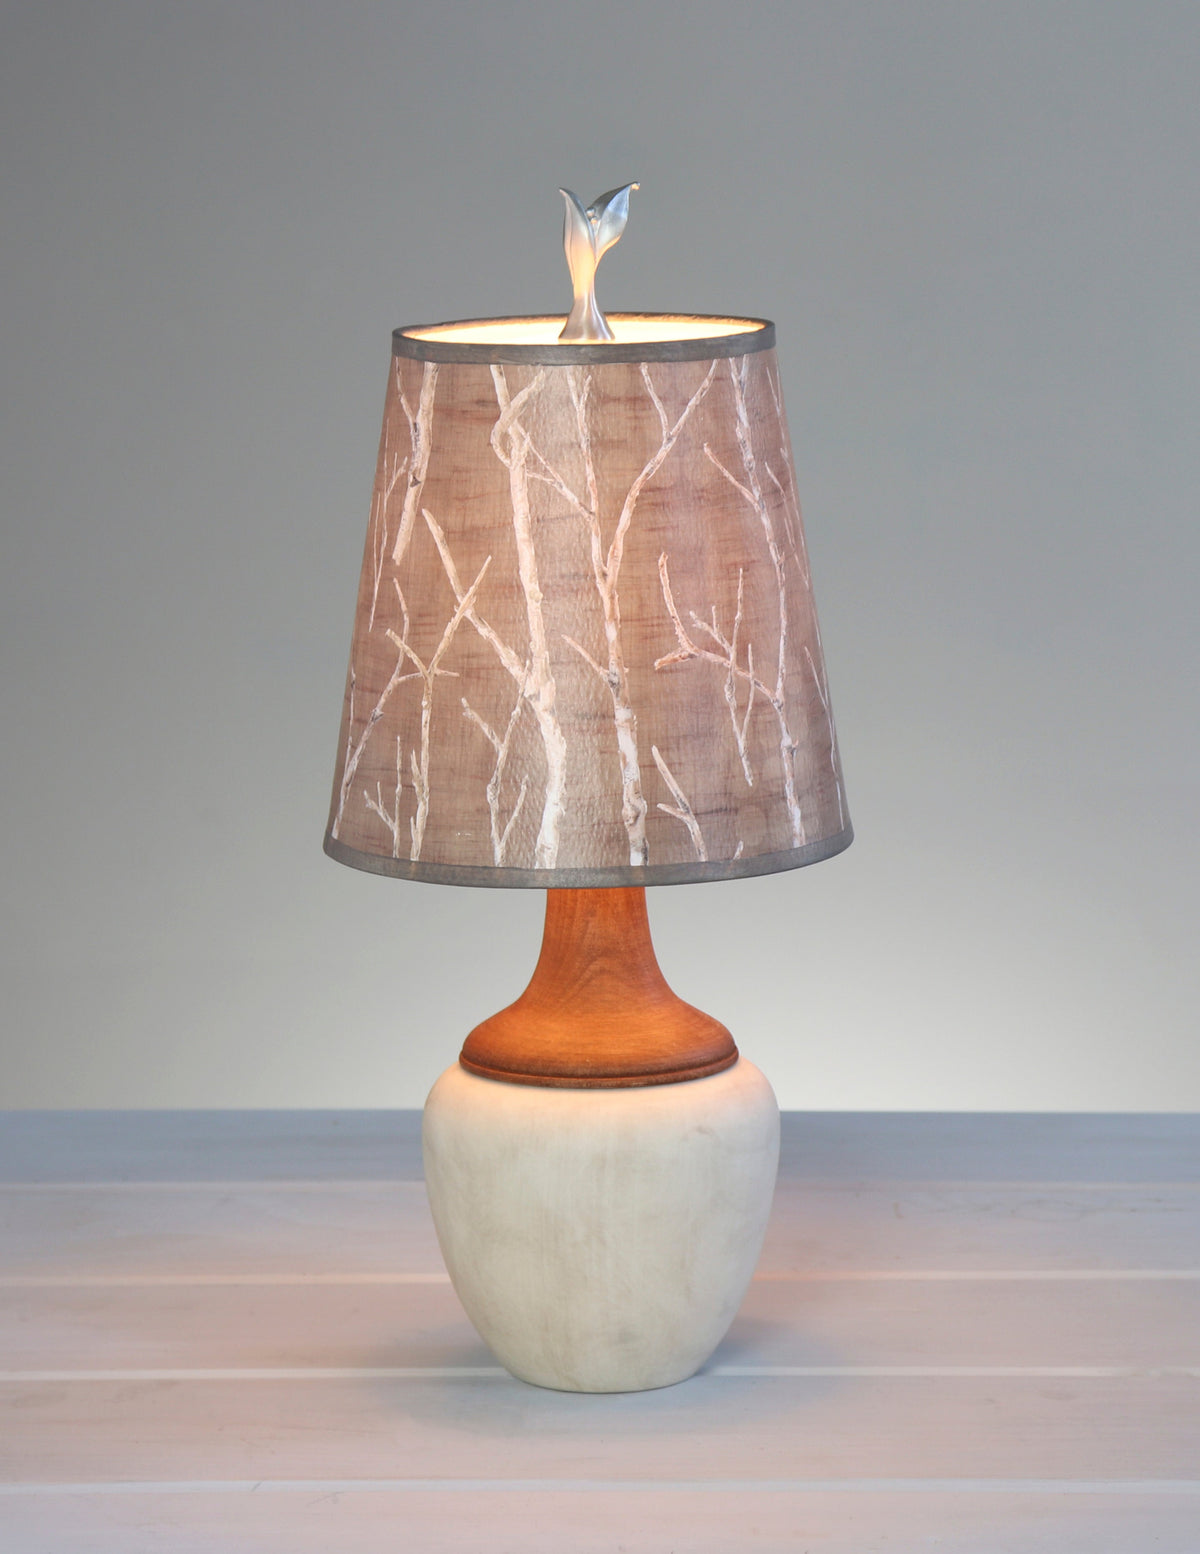 Ceramic and Maple Table Lamp with Small Drum Shade in Twigs